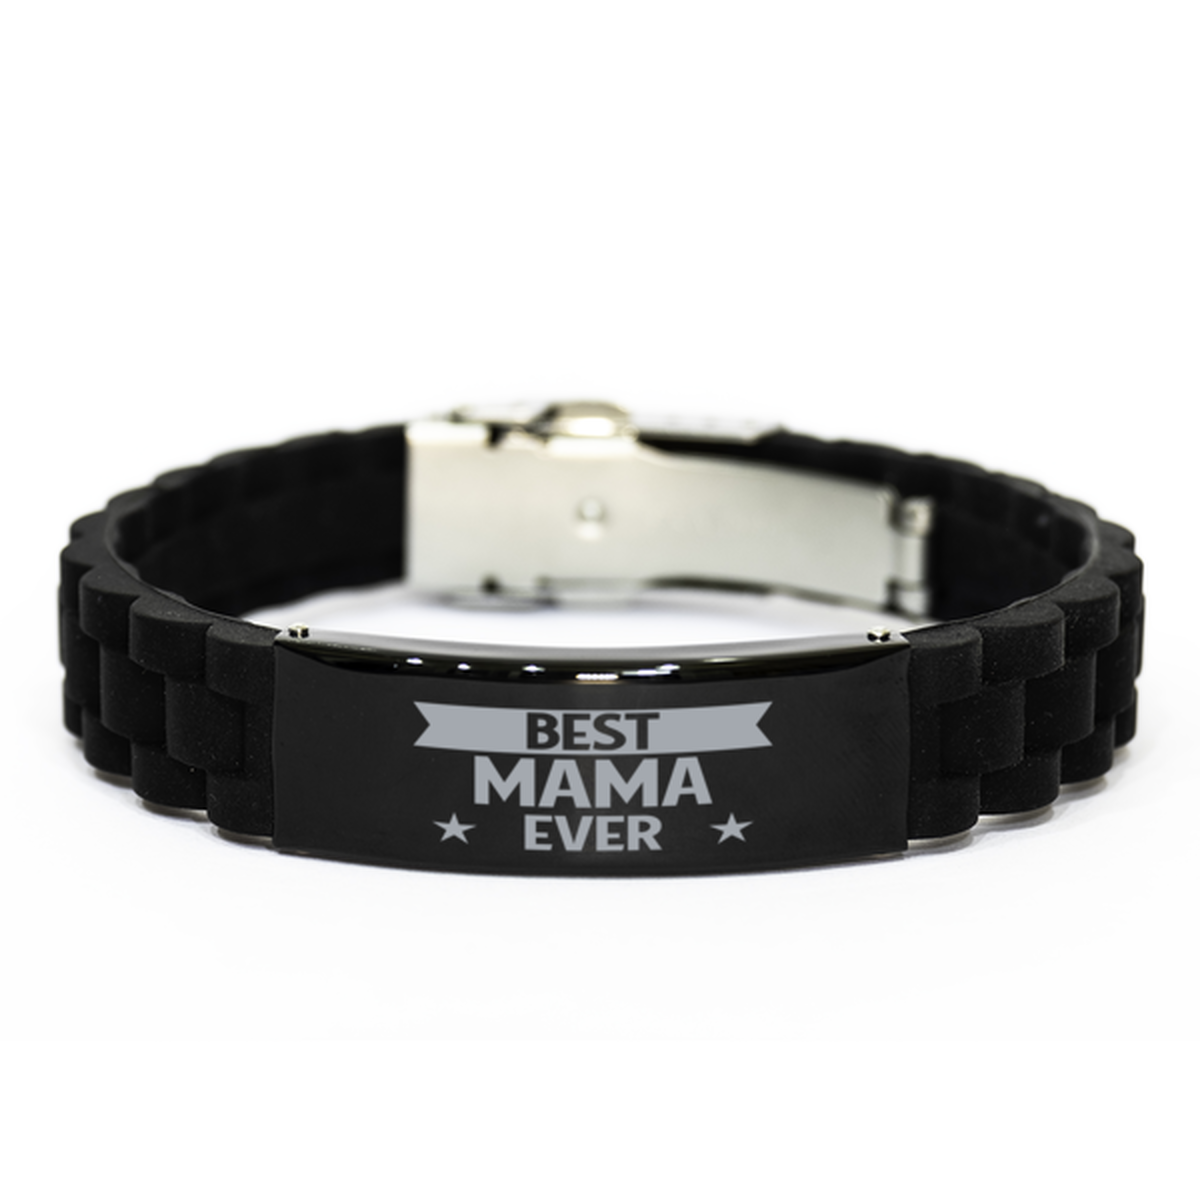 Best Mama Ever Mama Gifts, Funny Black Engraved Bracelet For Mama, Family Gifts For Women